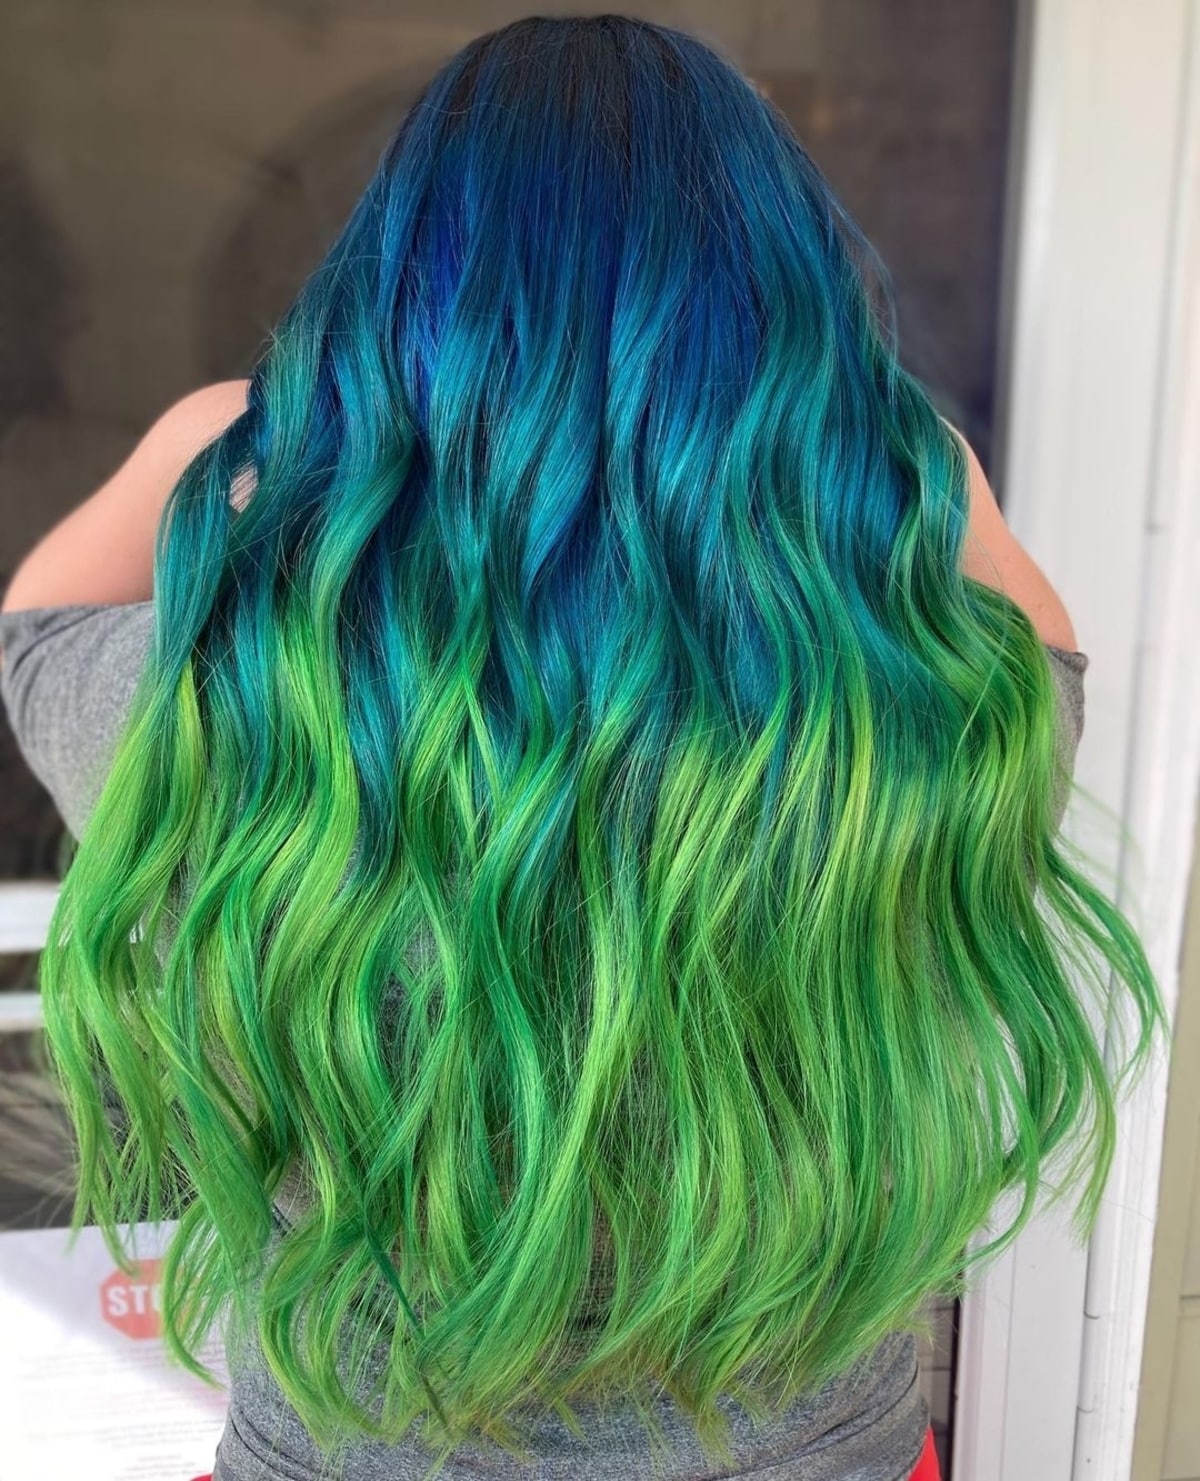 Blue-green ombre